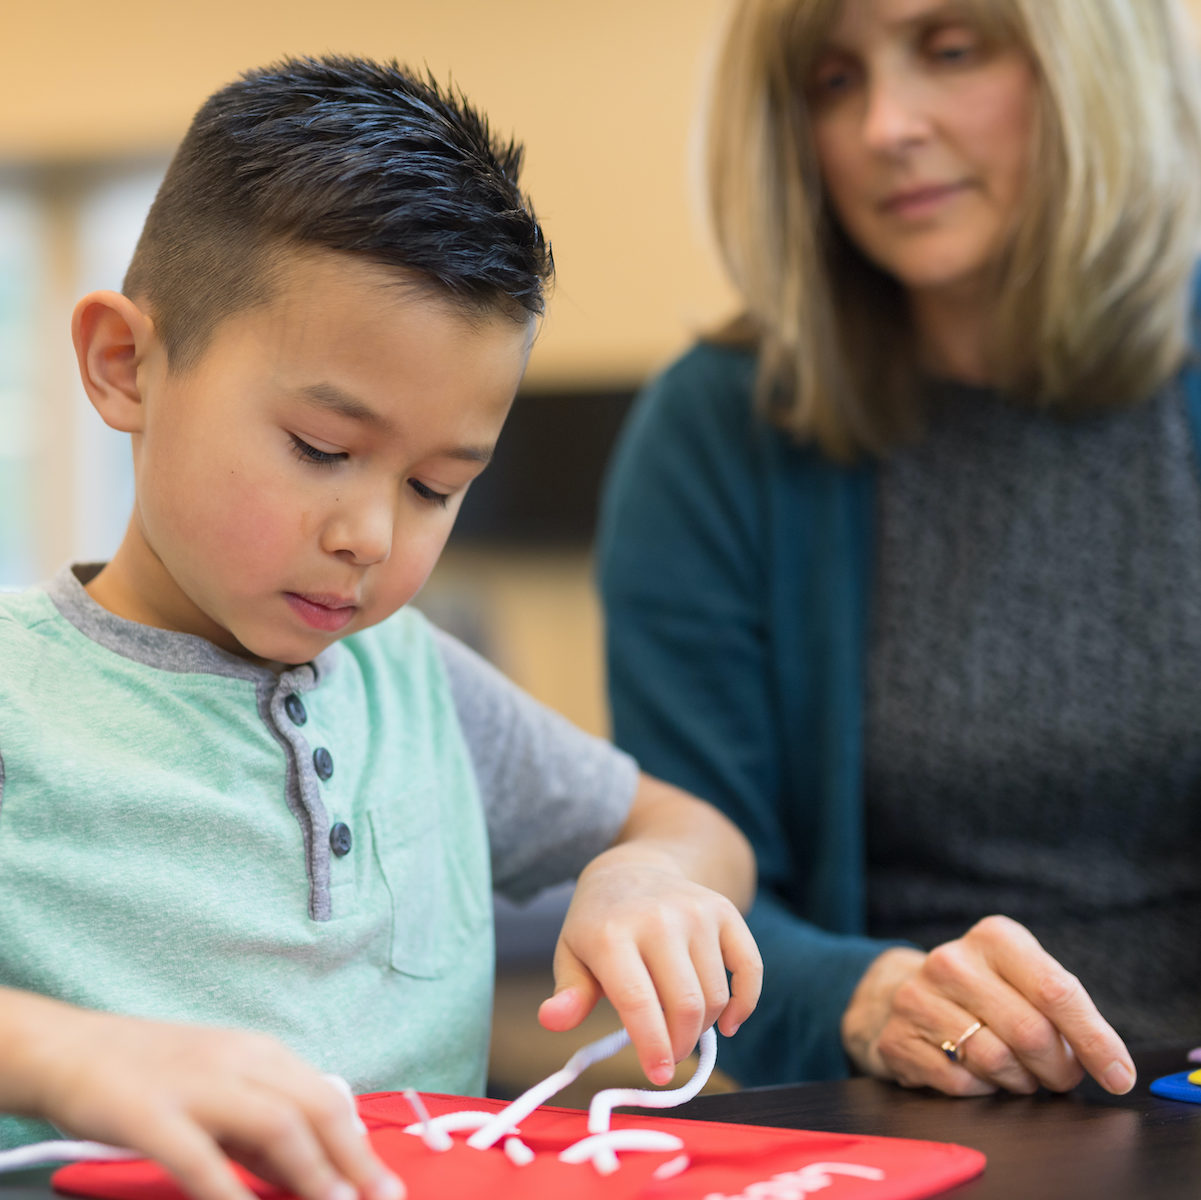 An occupational therapist works with a young elementary-age ethnic boy on his coordination skills. She is showing him a fun exercise for him to practice tying knots. The shot is focused on him.